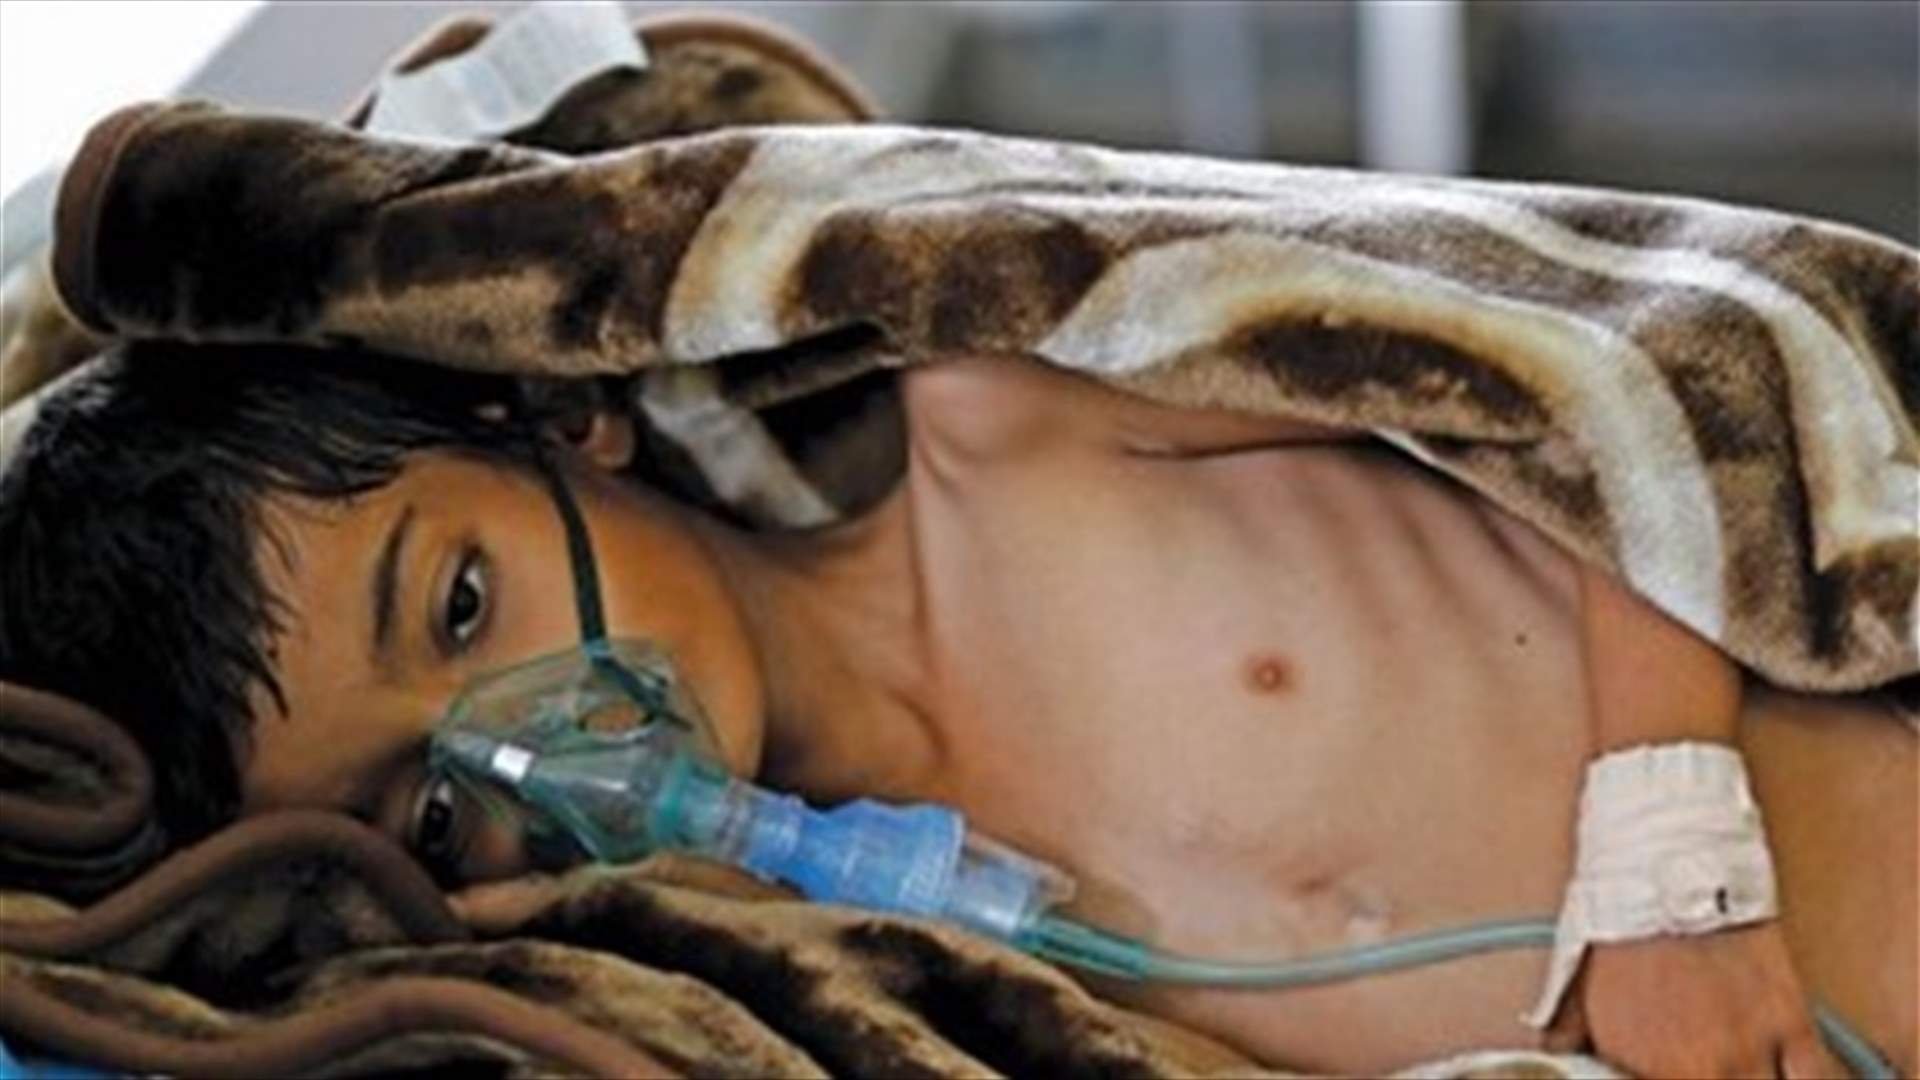 Yemen cholera cases could hit 1 million by year-end - Red Cross